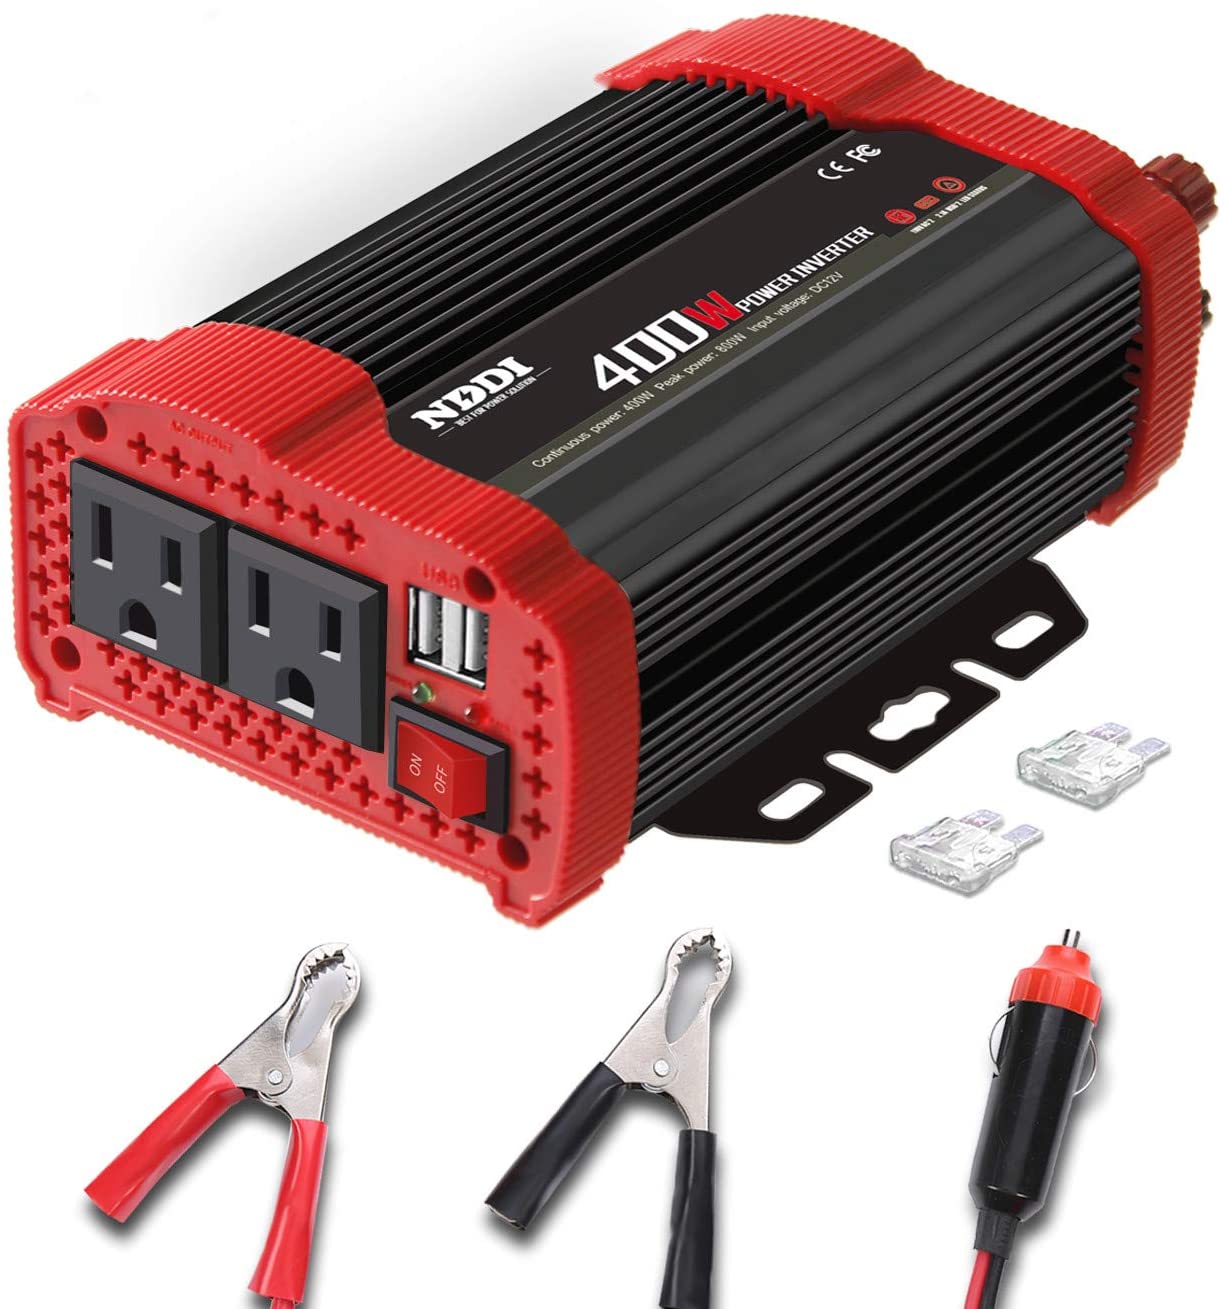 NDDI 400W Car Power Inverter, DC 12V to 110V AC Converter with 2 Charger Outlets and Dual 3.1A USB Ports Cigarette Lighter Socket Adapter